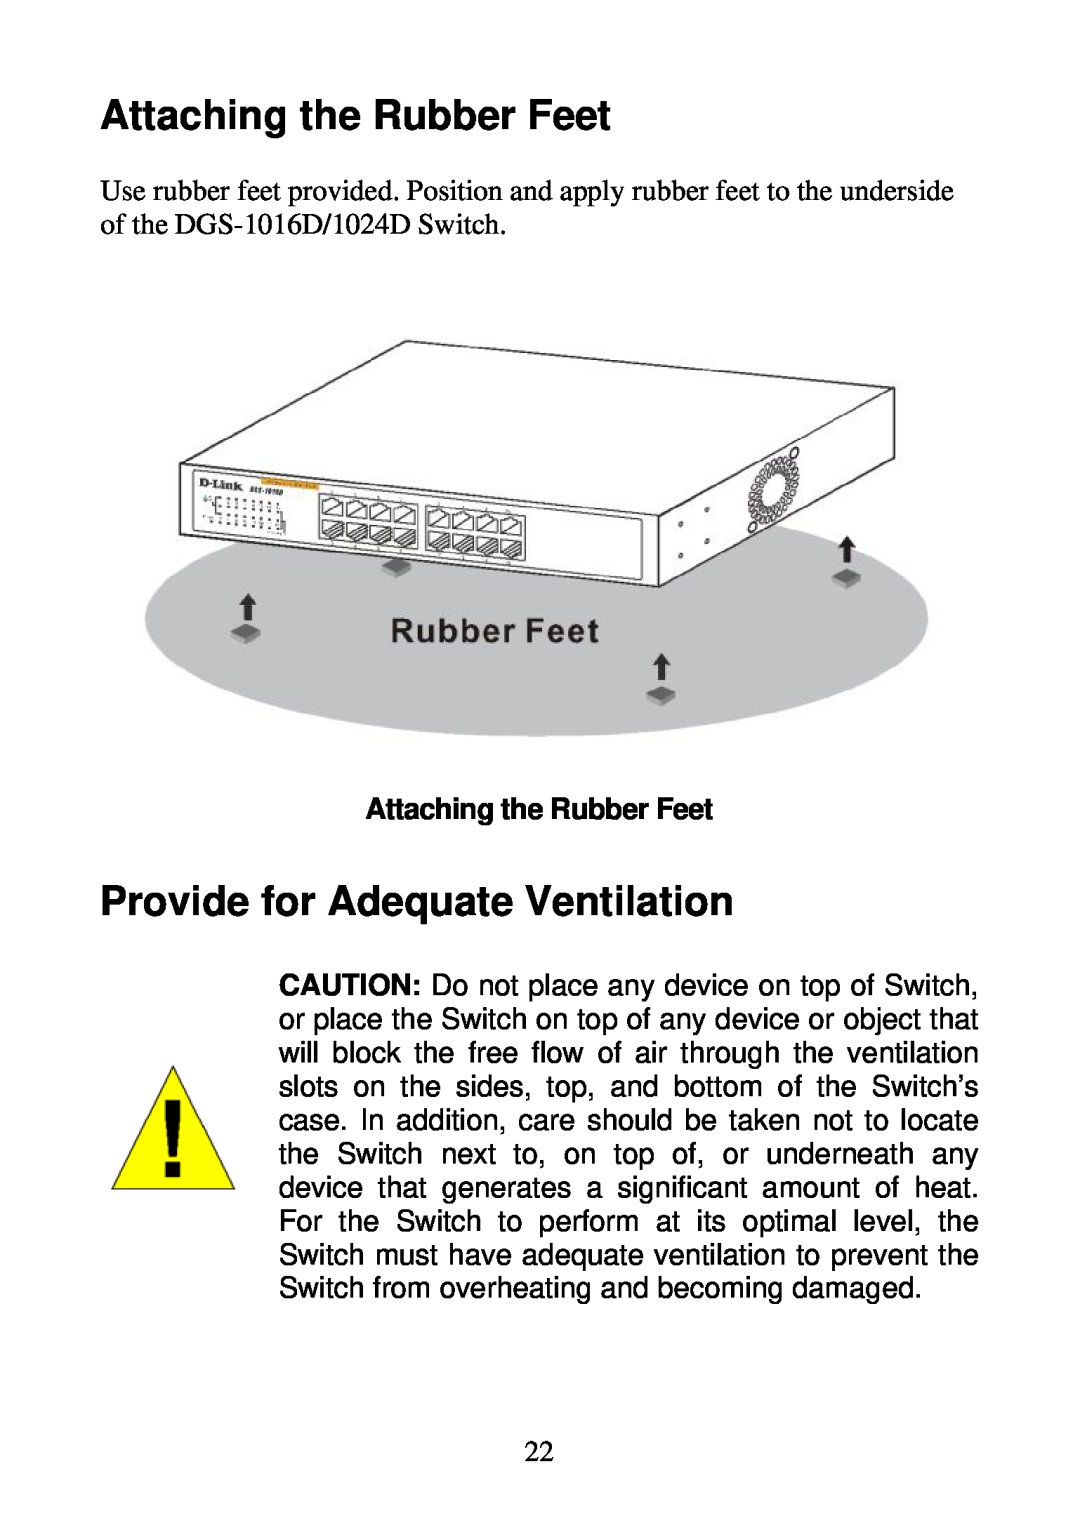 D-Link DGS-1024D, DGS-1016D manual Attaching the Rubber Feet, Provide for Adequate Ventilation 